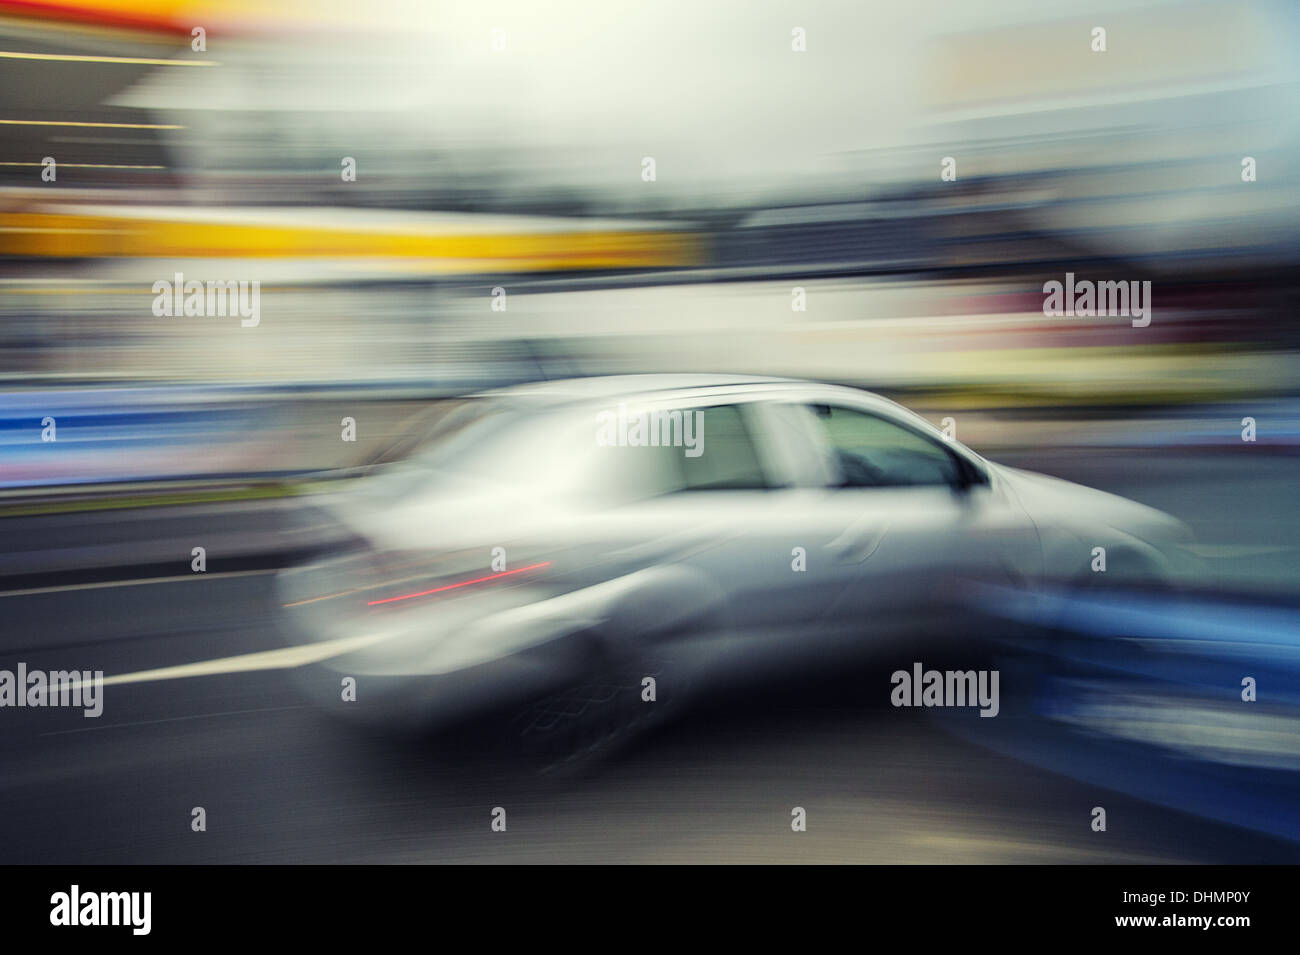 Car runs at excessive speeds in a built-up Stock Photo